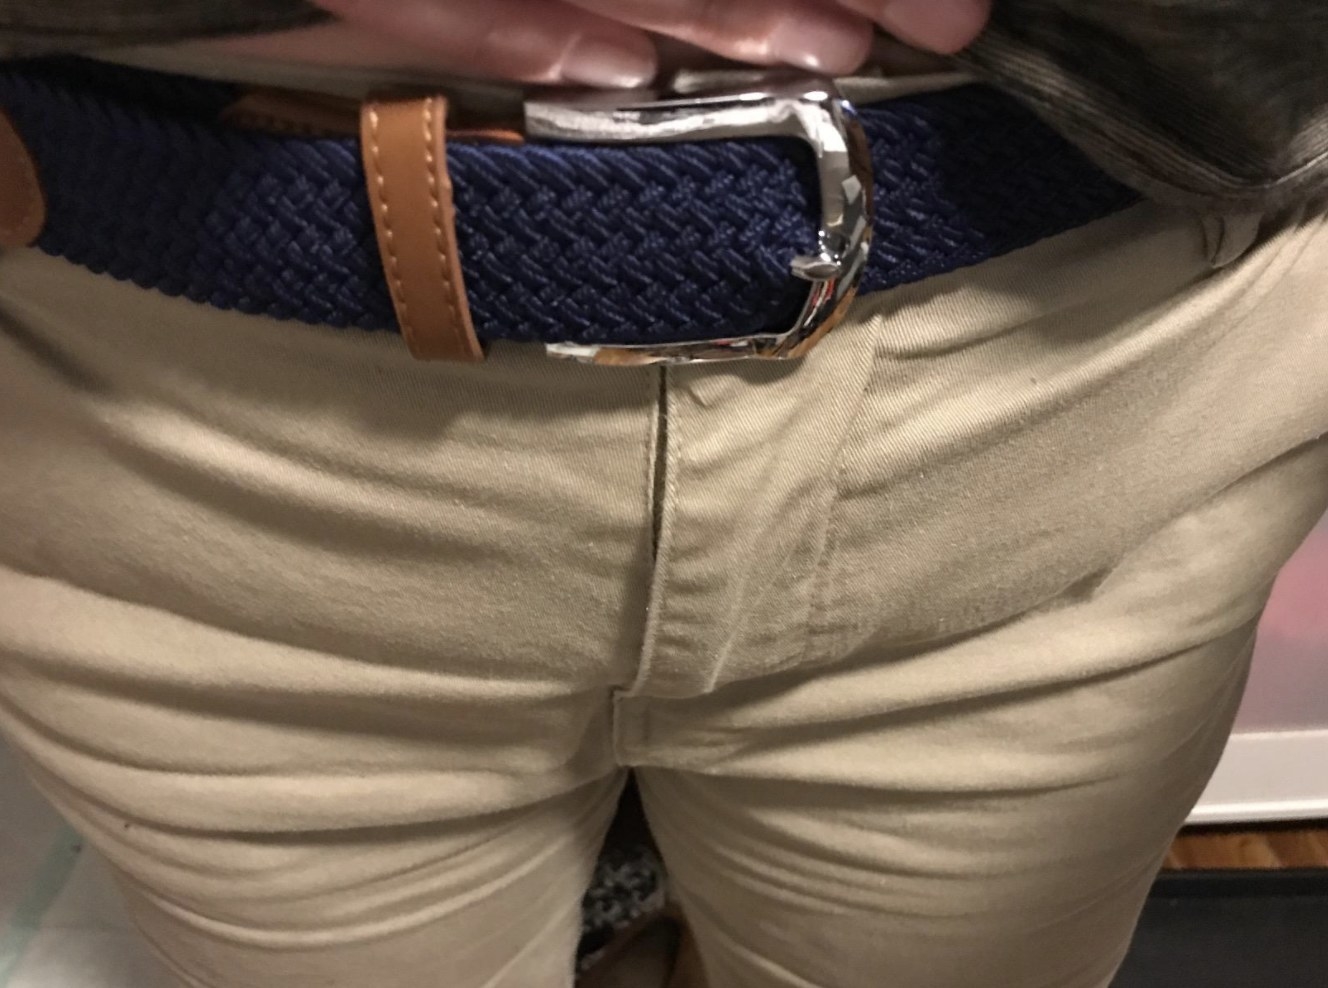 reviewer wearing the braided canvas belt in blue